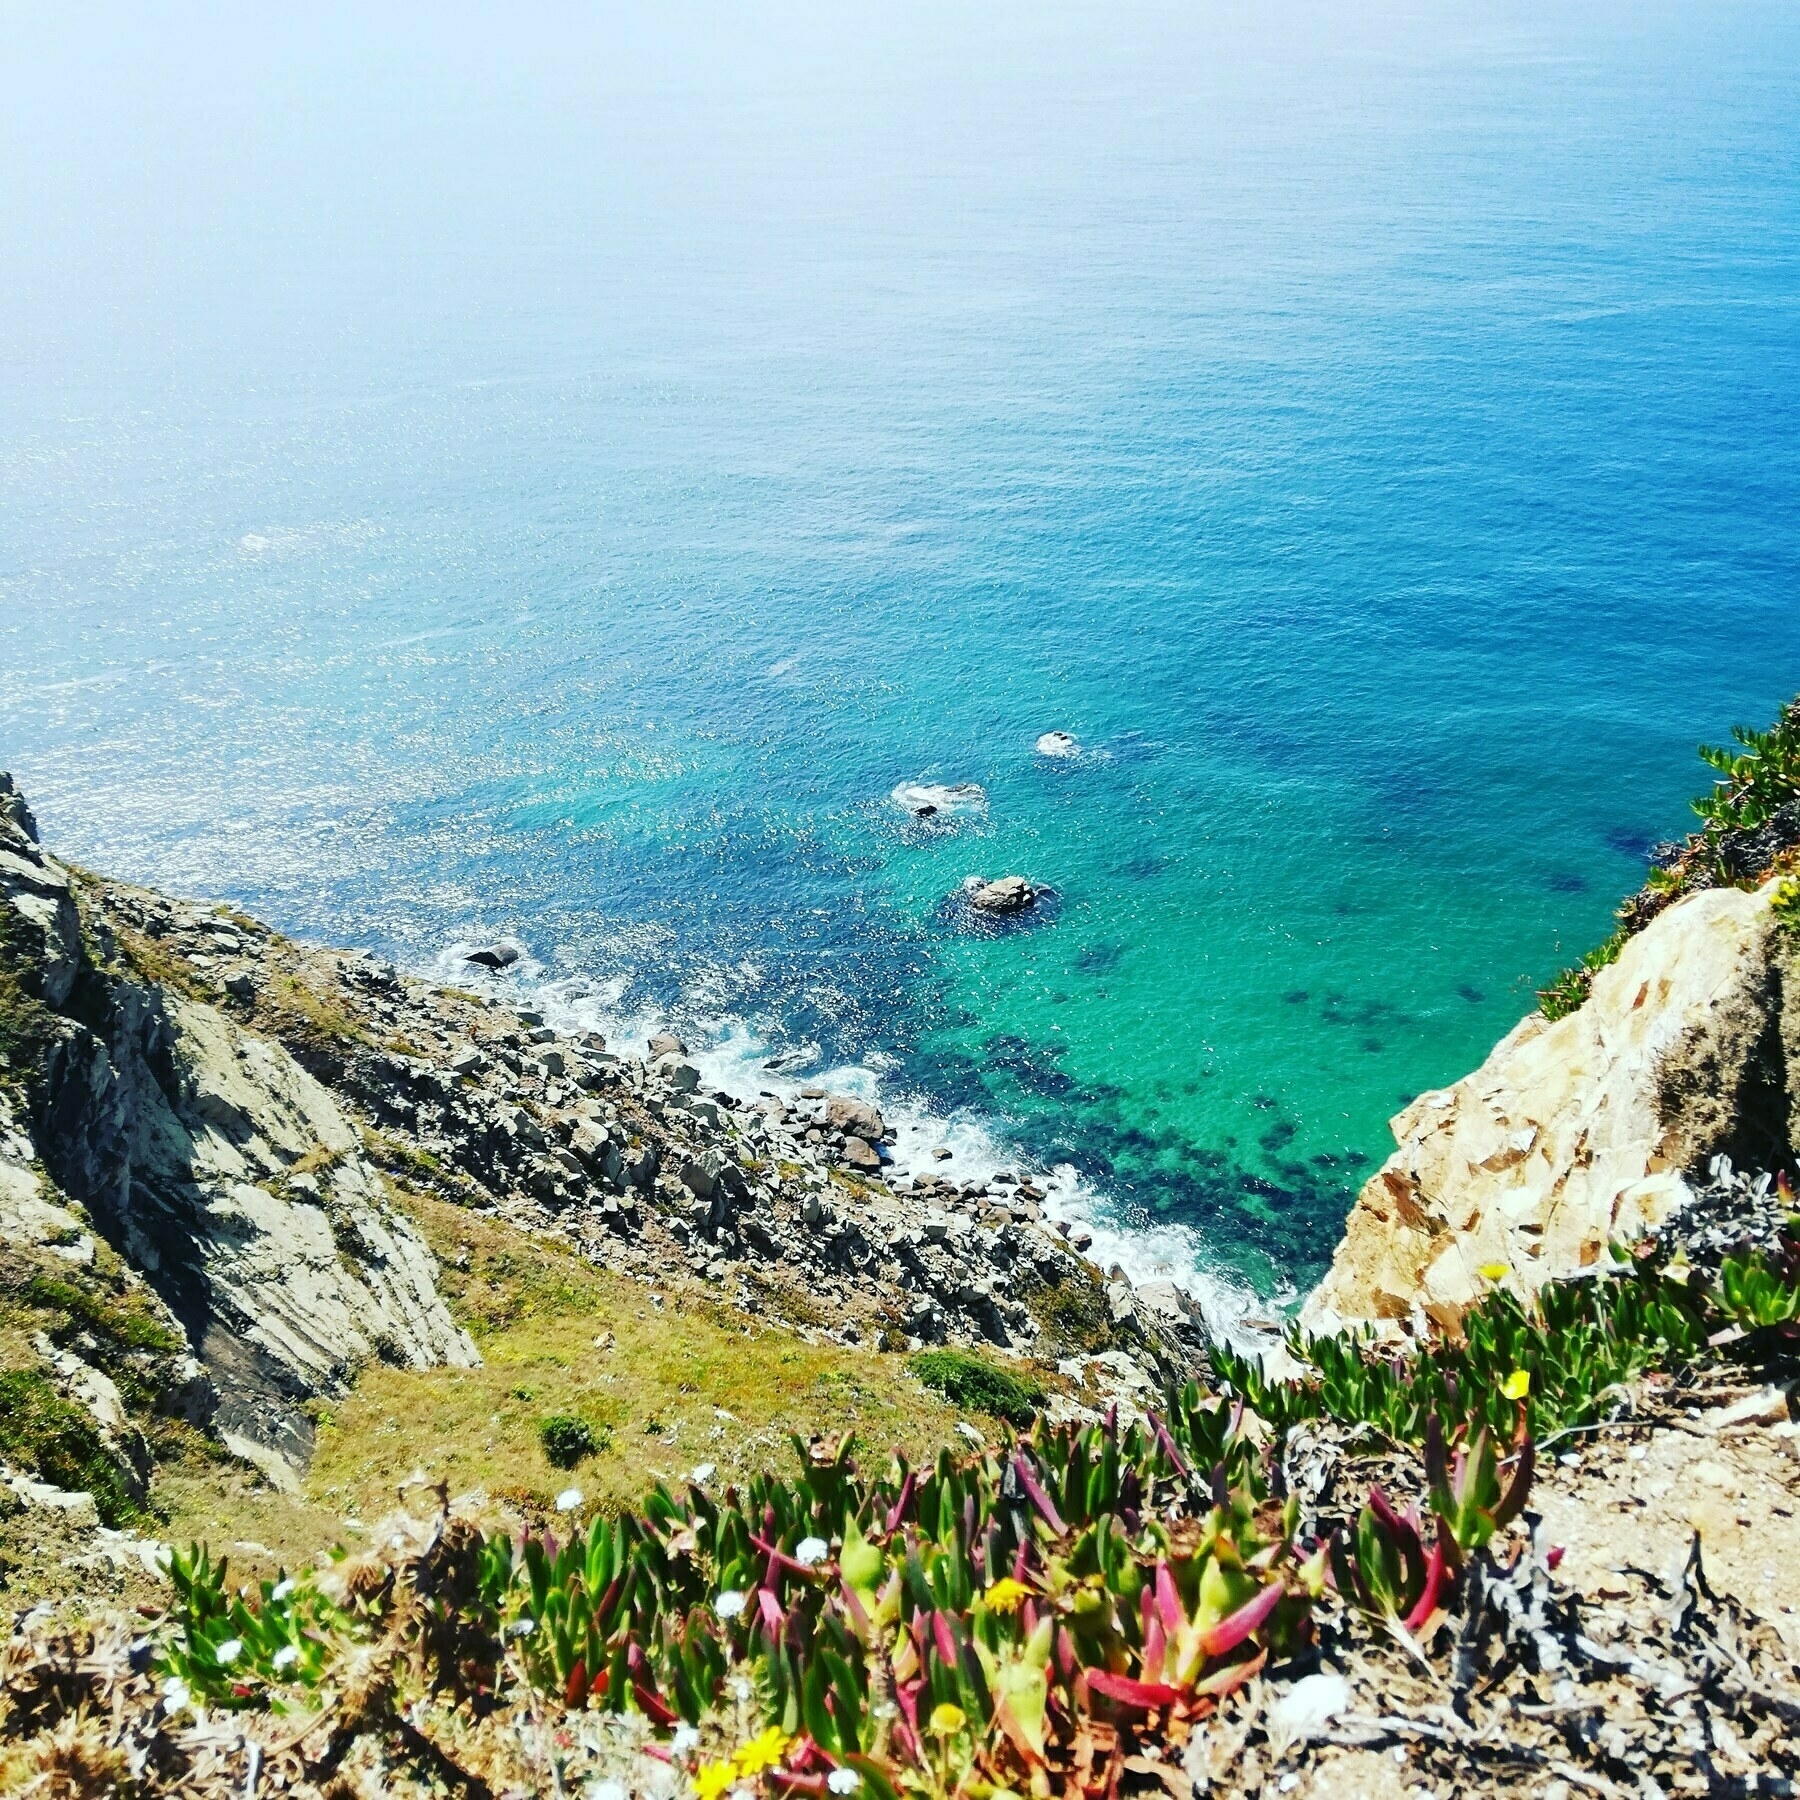 View from a cliff in Portugal 2018